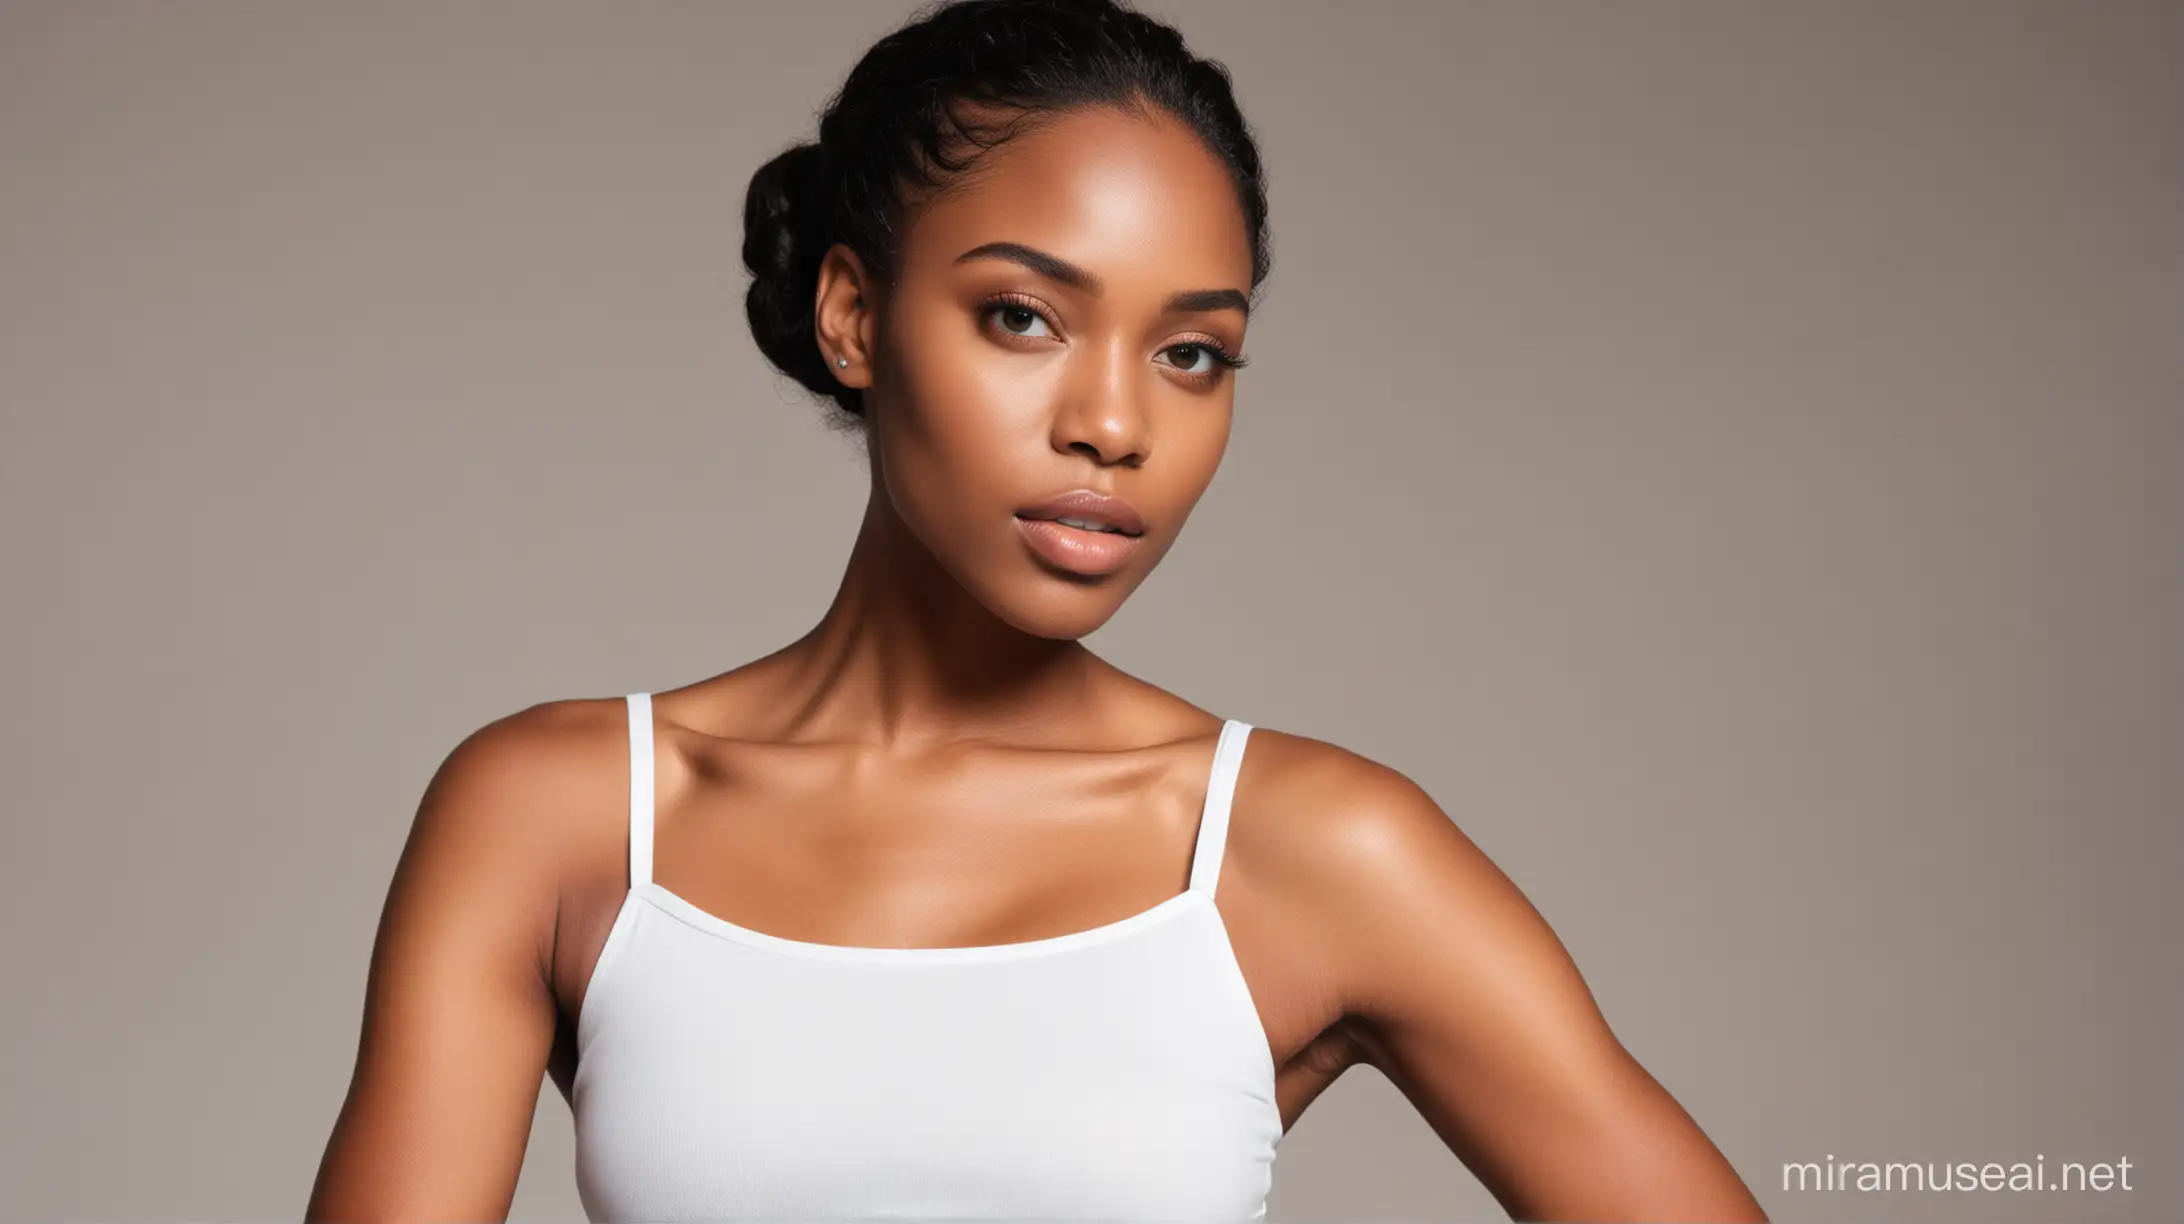 black woman model with facing the camera with a plain white crop top on